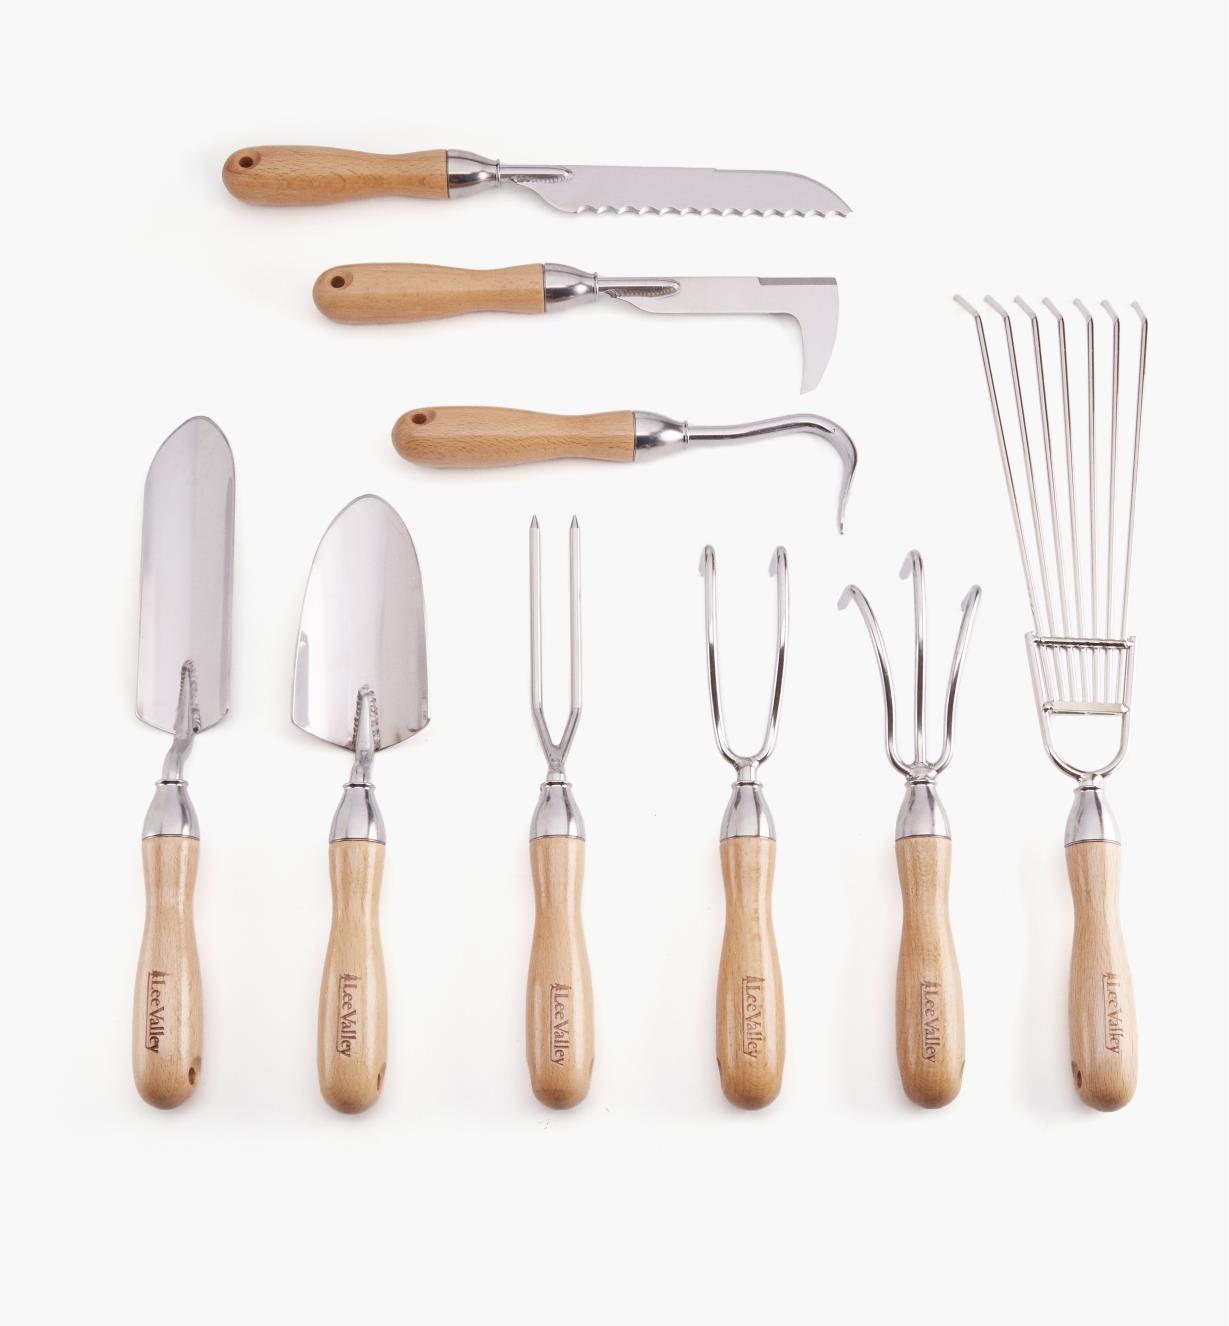 AB634 - Set of 9 Lee Valley Garden Tools